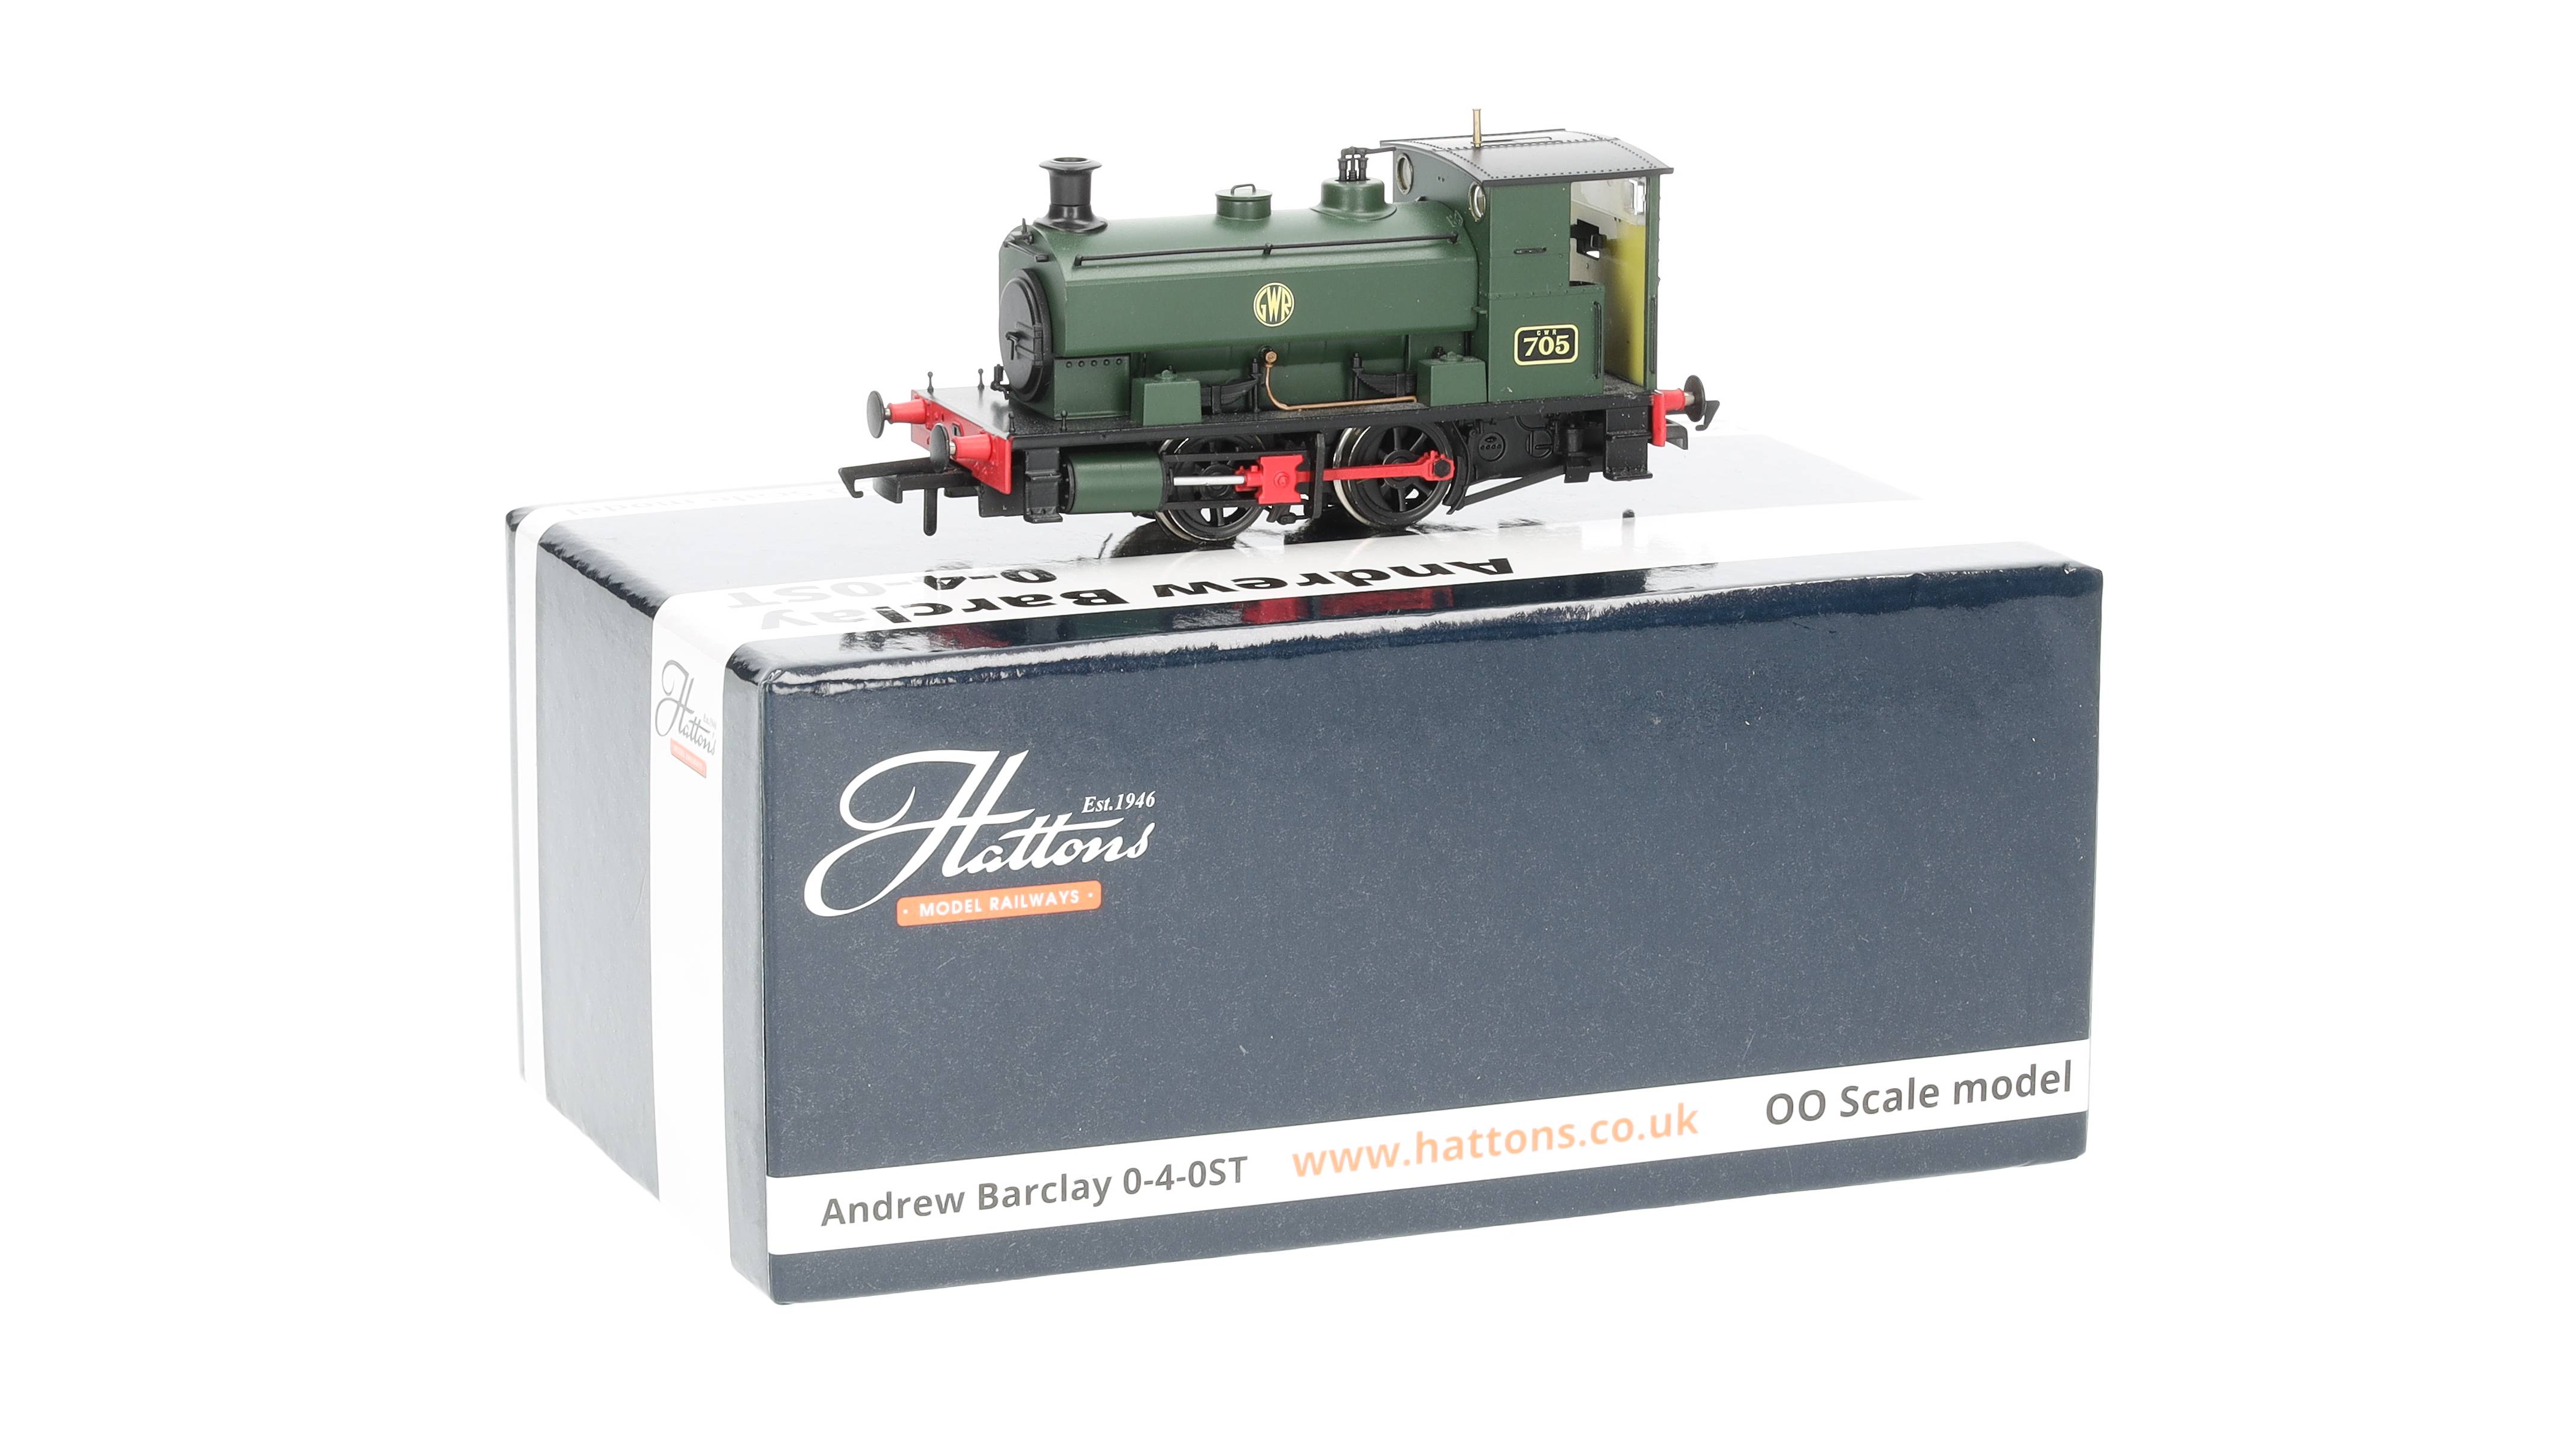 H4-AB14-002 Hattons Originals OO Gauge Andrew Barclay 14 2047 '705'(Pre-Owned) - Photo 1/1